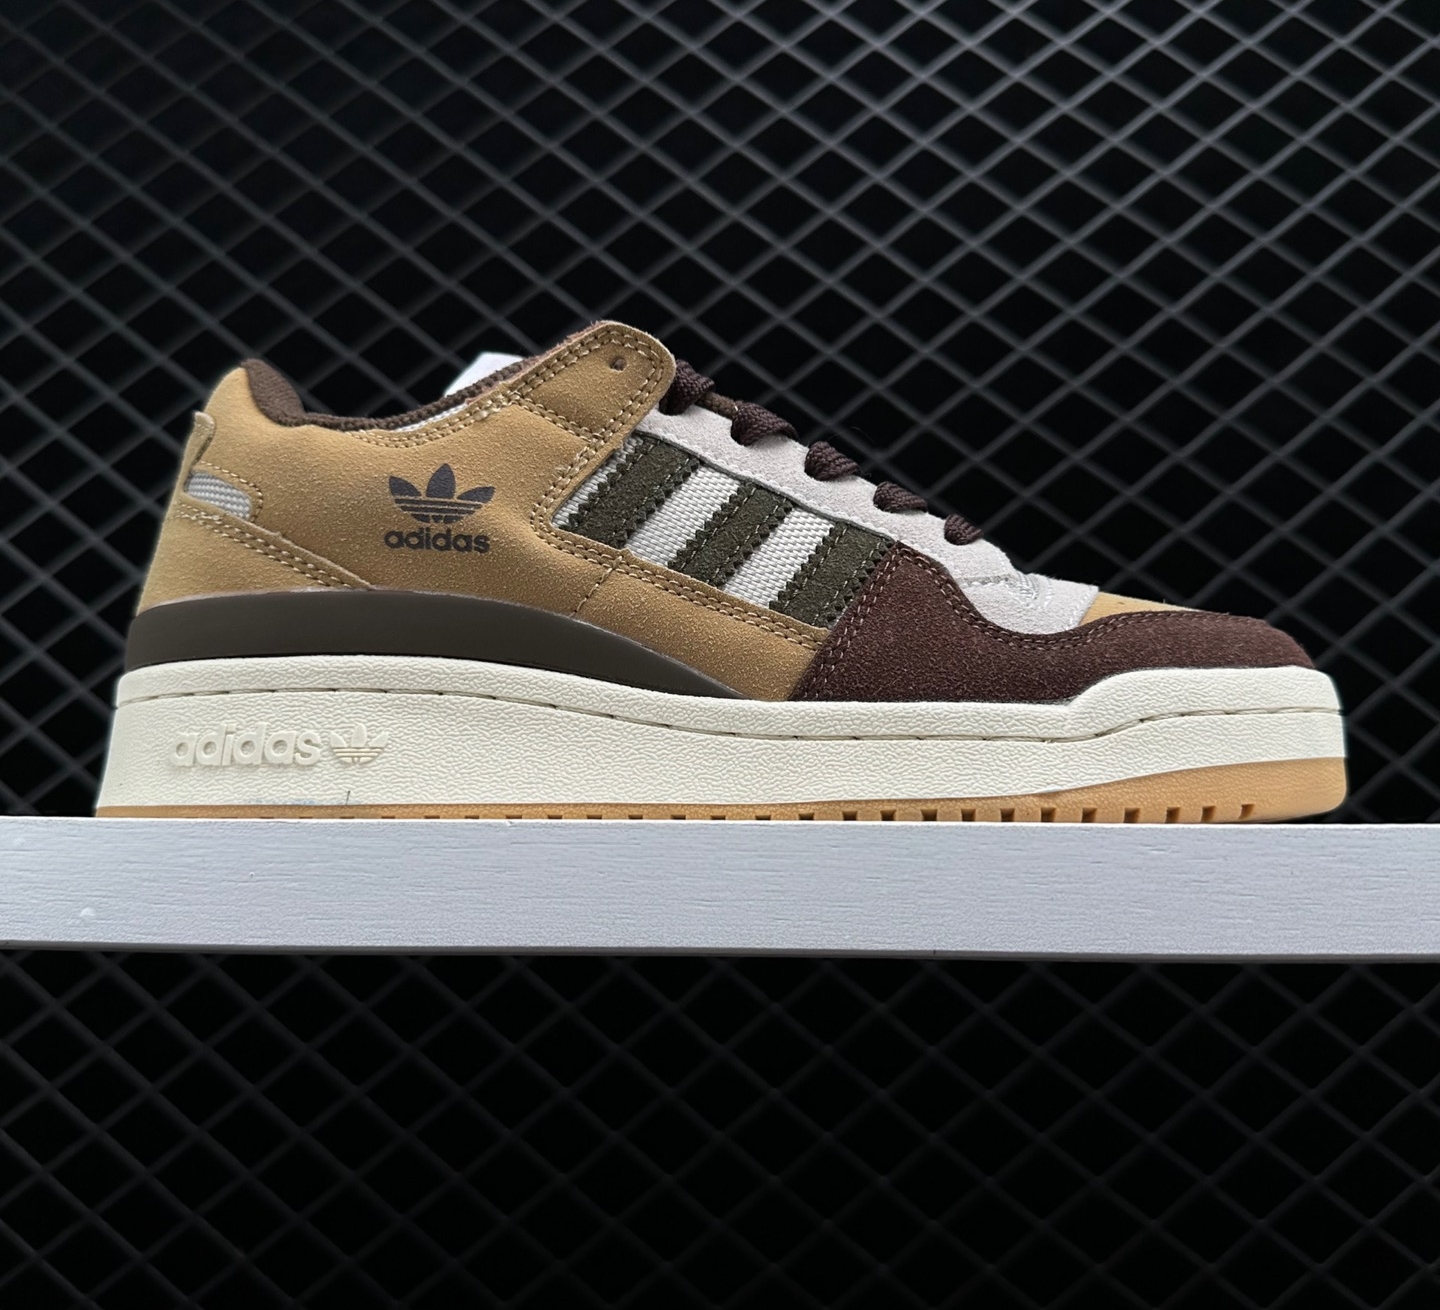 Adidas Forum Low 84 'Branch Brown' GW4334 - Premium Sneakers for Style and Comfort